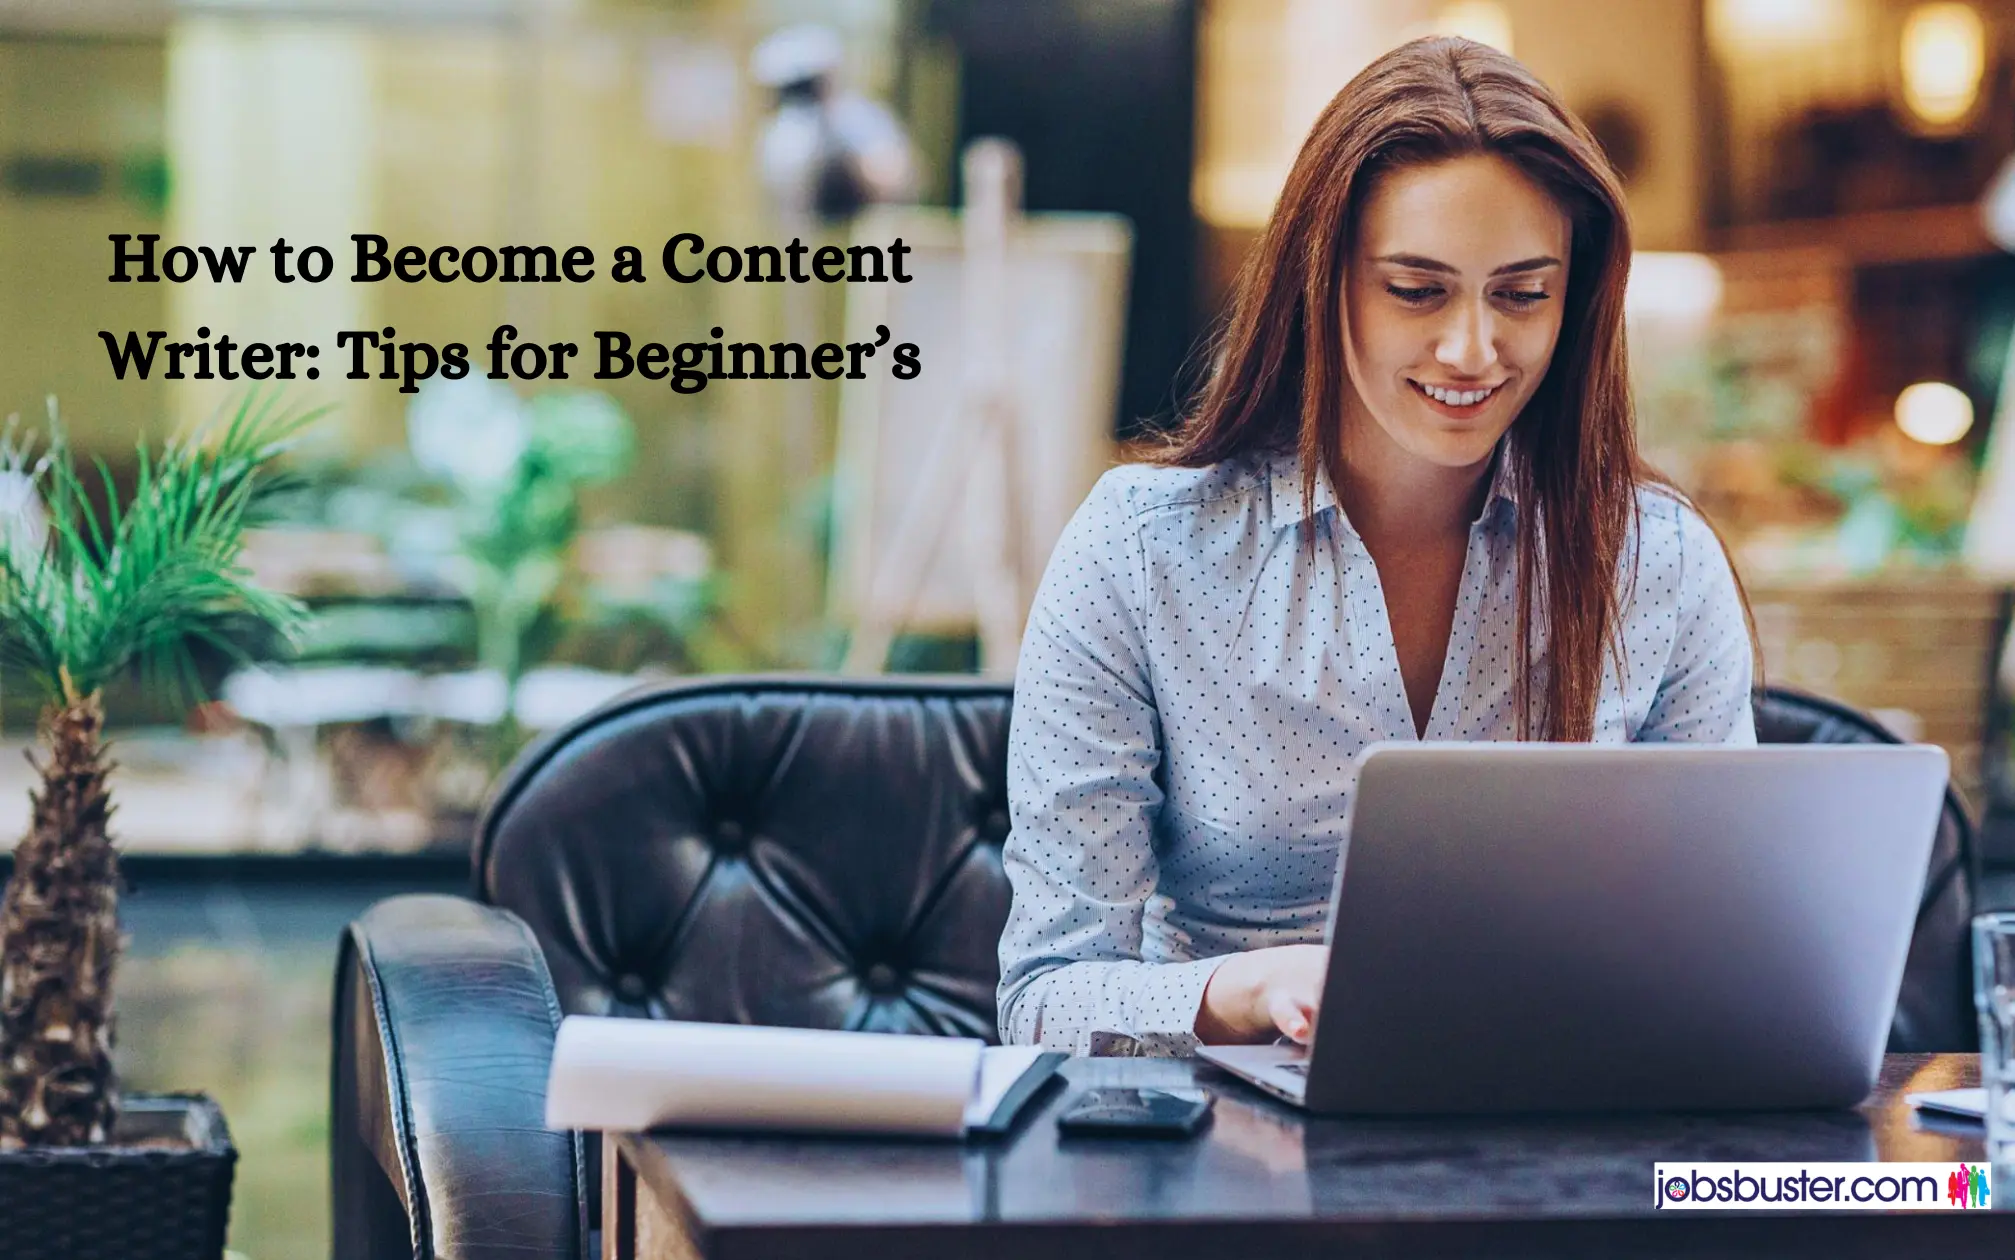 How to Become a Content Writer: Tips for Beginner’s